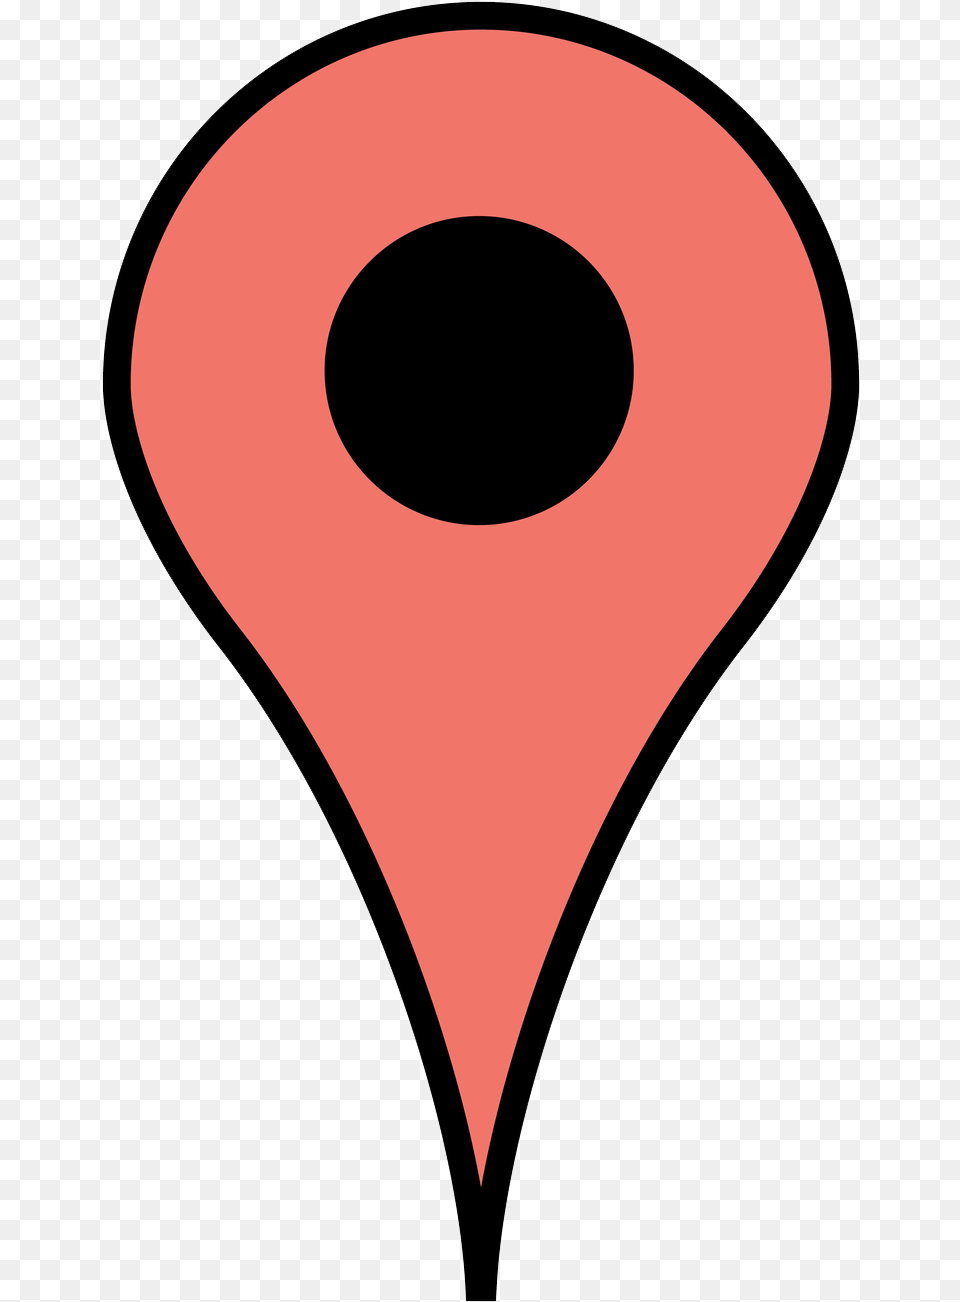 Google Maps Pointer Clipart Download Google Maps Google Maps Pin, Heart, Balloon Png Image